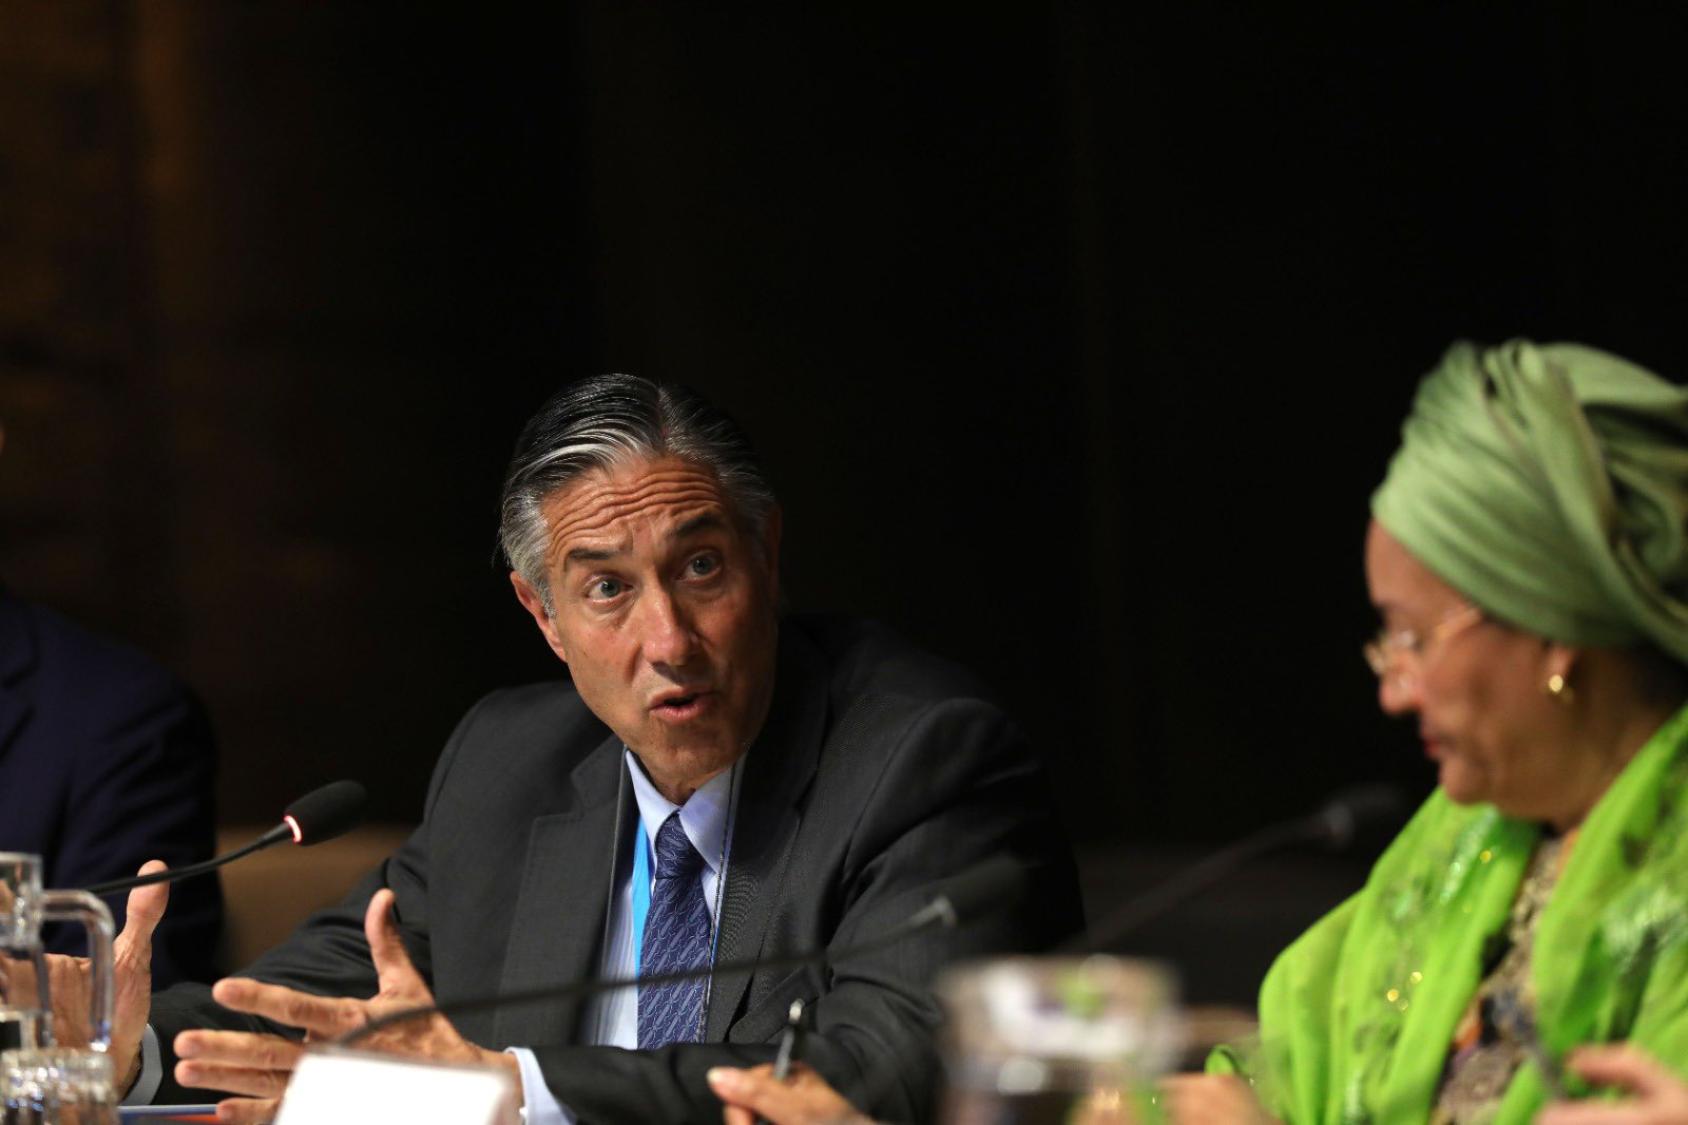 A man in a dark suit and blue tie speaks into a microphone while a woman in a green dress and headscarf listens keenly to him.